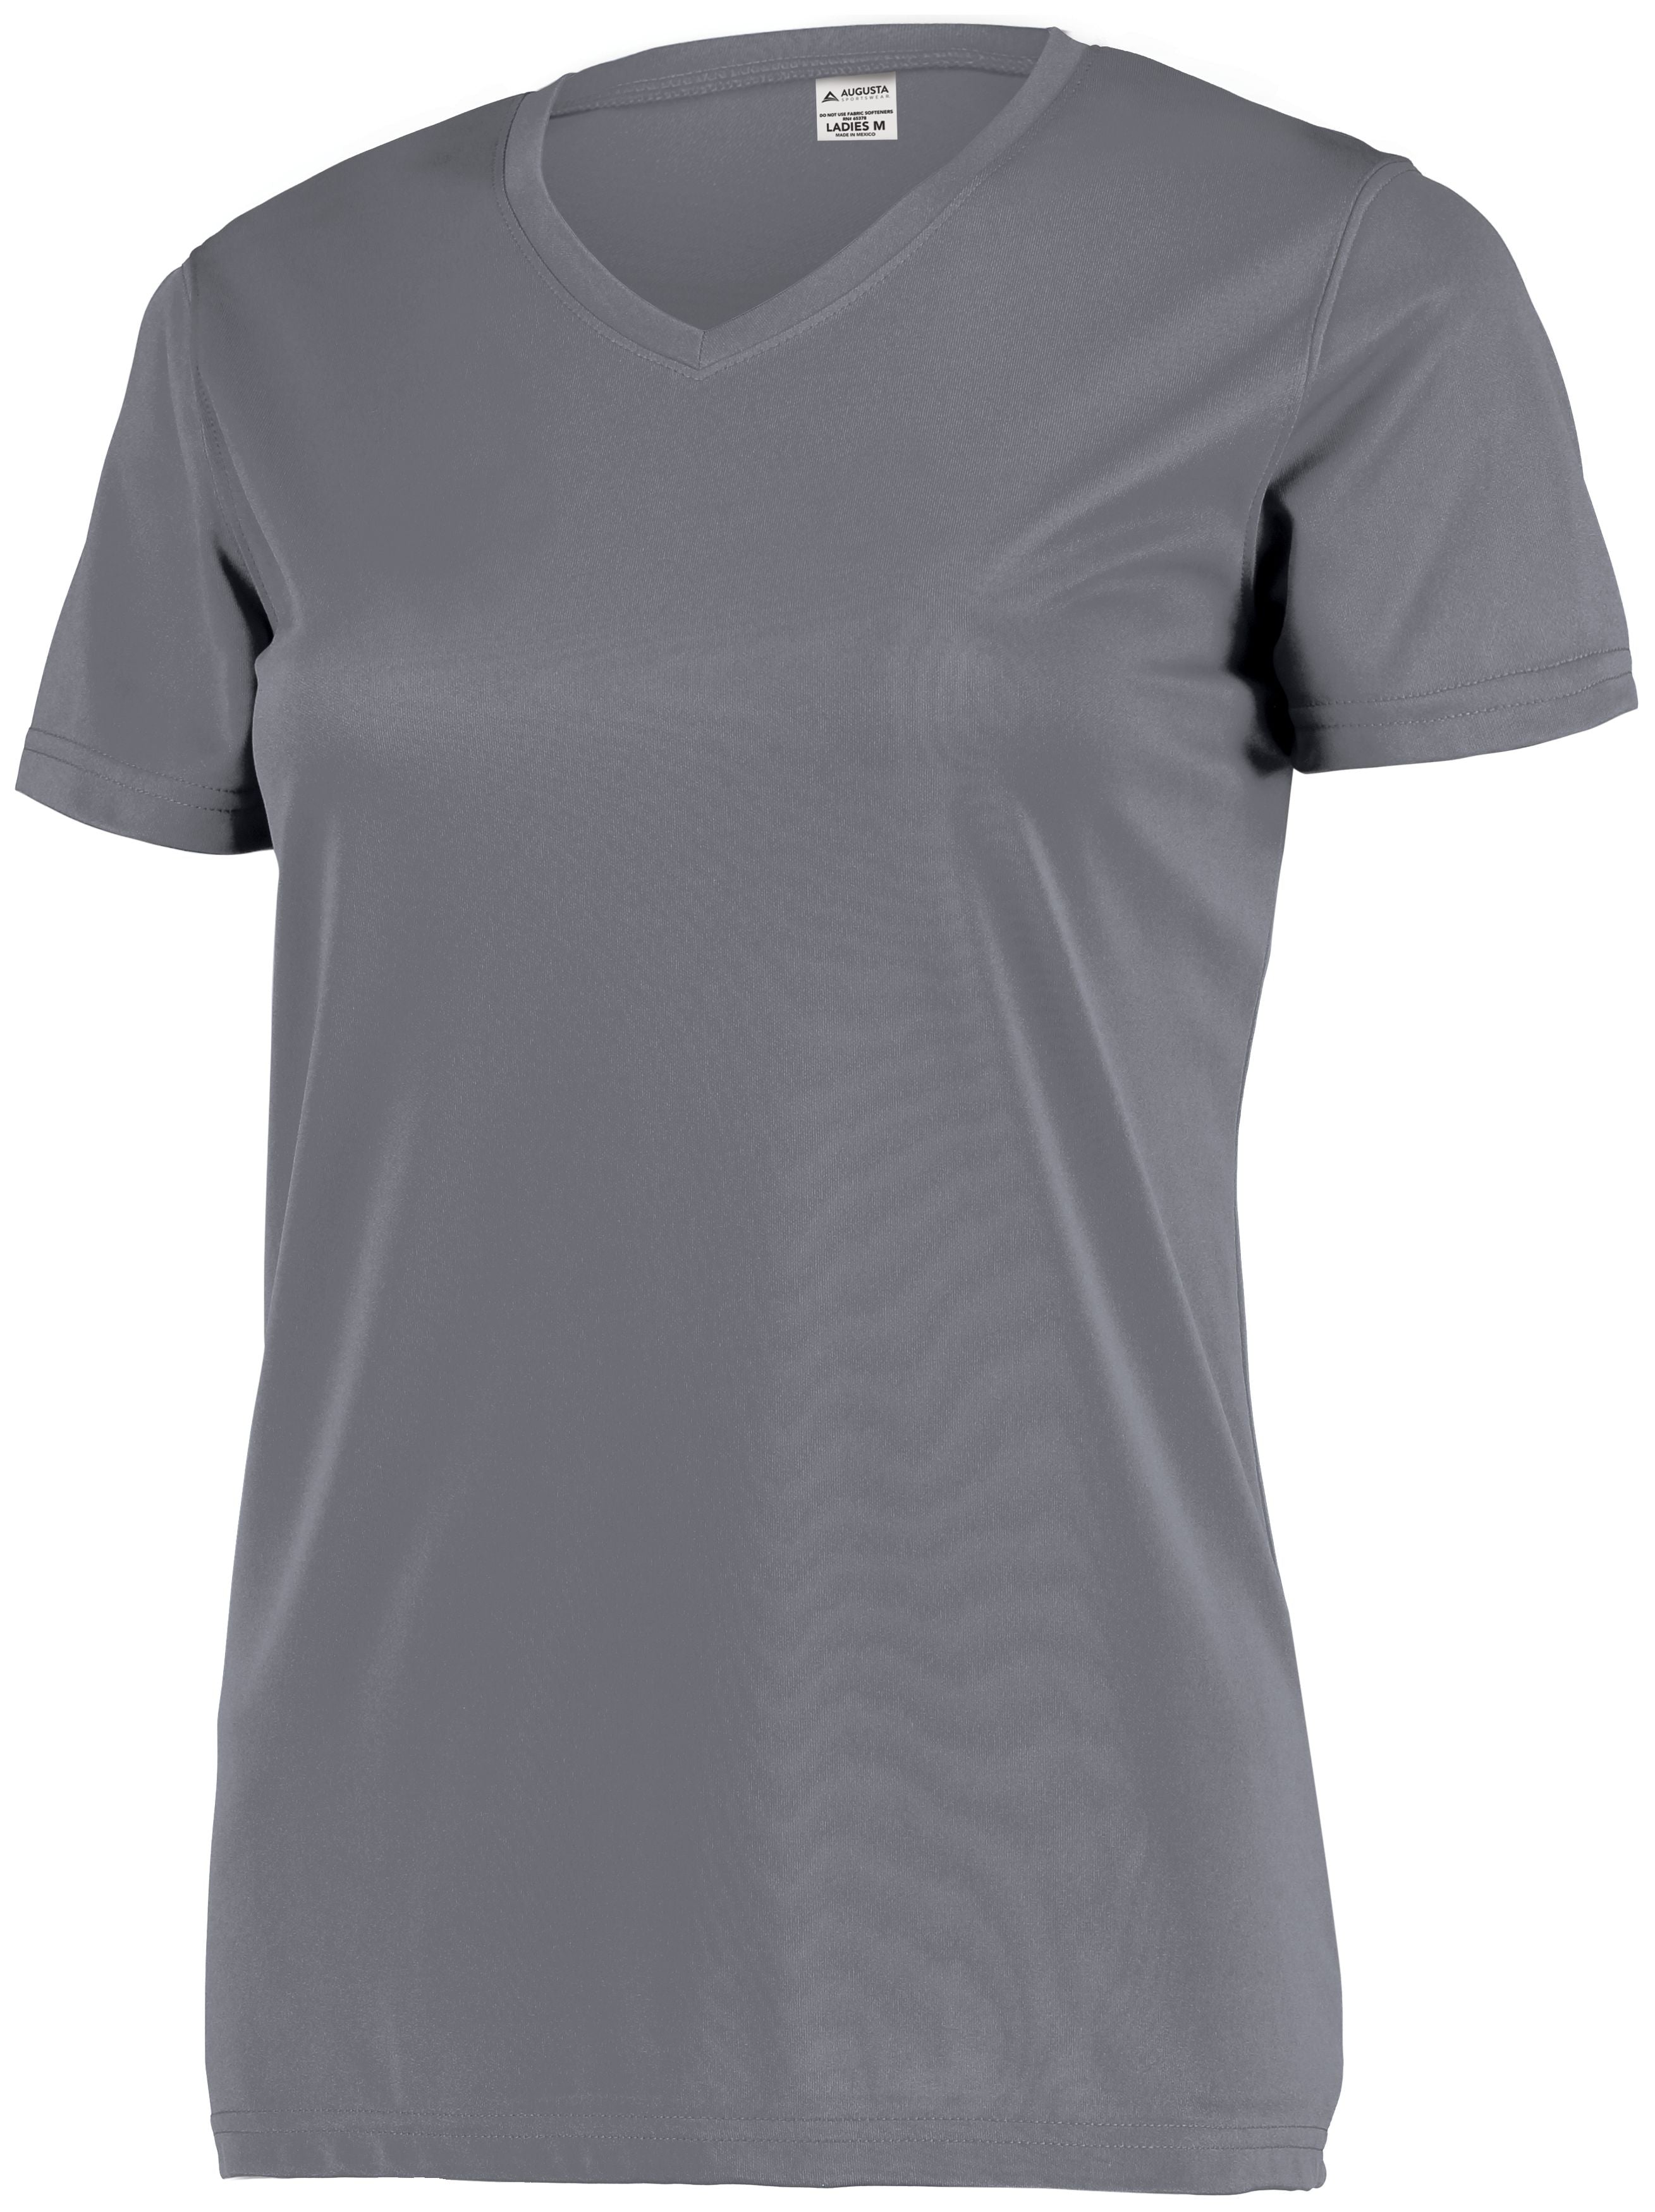 Augusta Sportswear Ladies Attain Wicking Set-In Sleeve Tee in Graphite  -Part of the Ladies, Ladies-Tee-Shirt, T-Shirts, Augusta-Products, Shirts product lines at KanaleyCreations.com